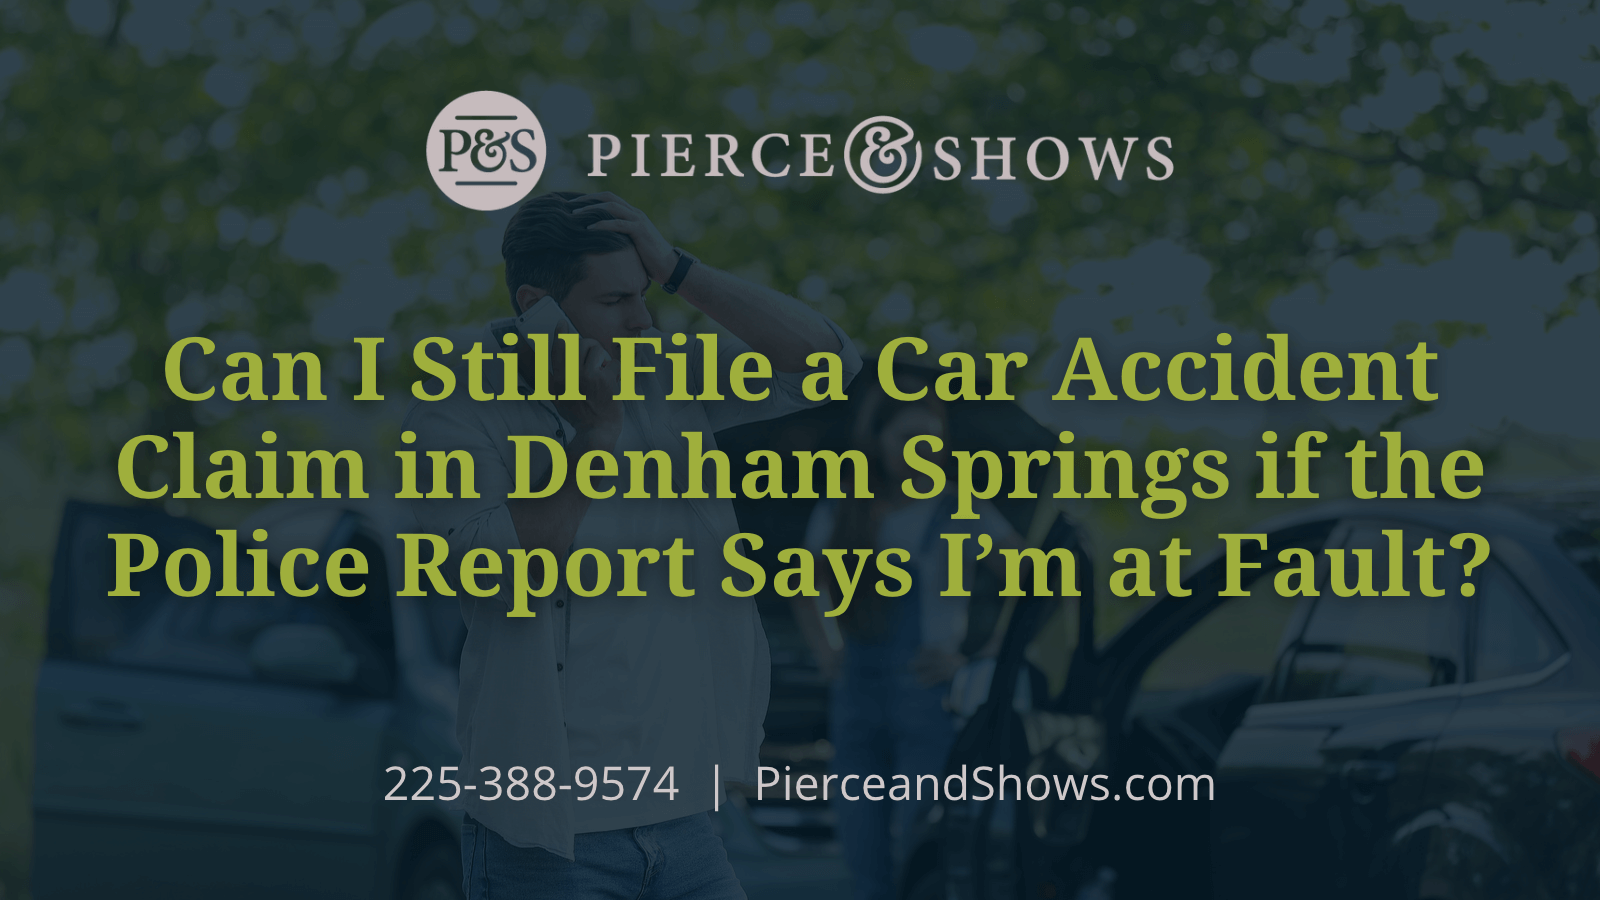 Can I Still File a Car Accident Claim in Denham Springs if the Police Report Says I’m at Fault - Baton Rouge Louisiana injury attorney Pierce & Shows